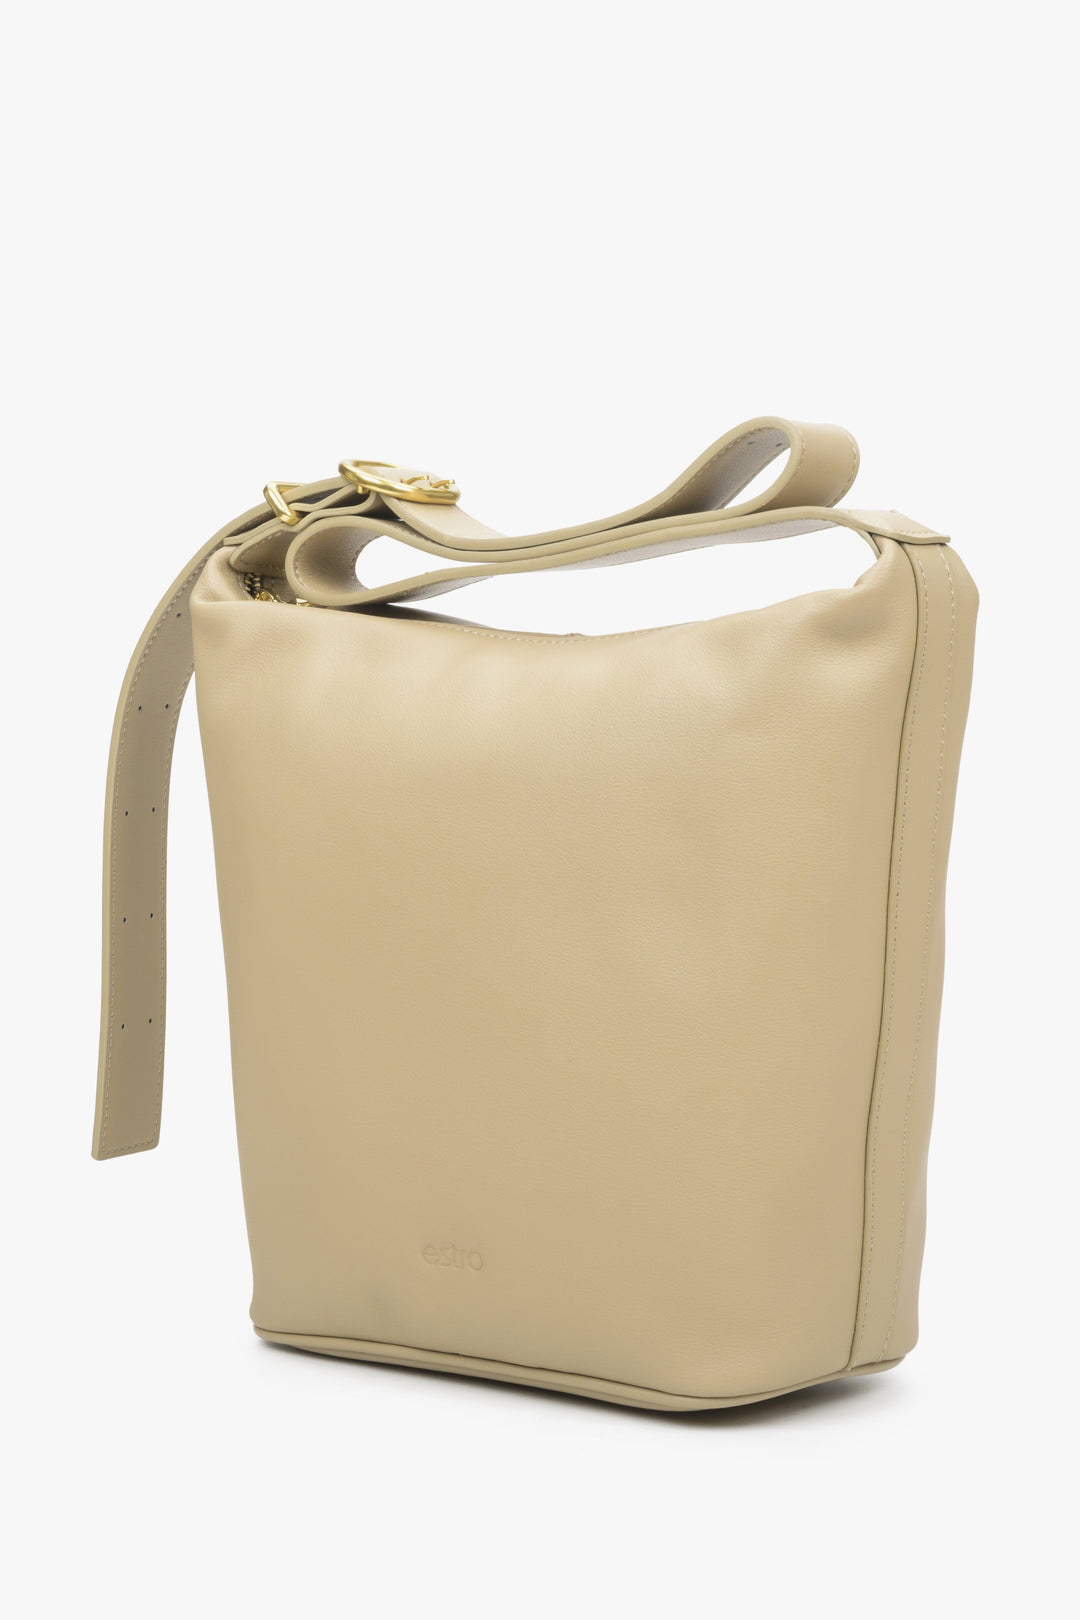 Beige bucket-style bag made of genuine leather by Estro.